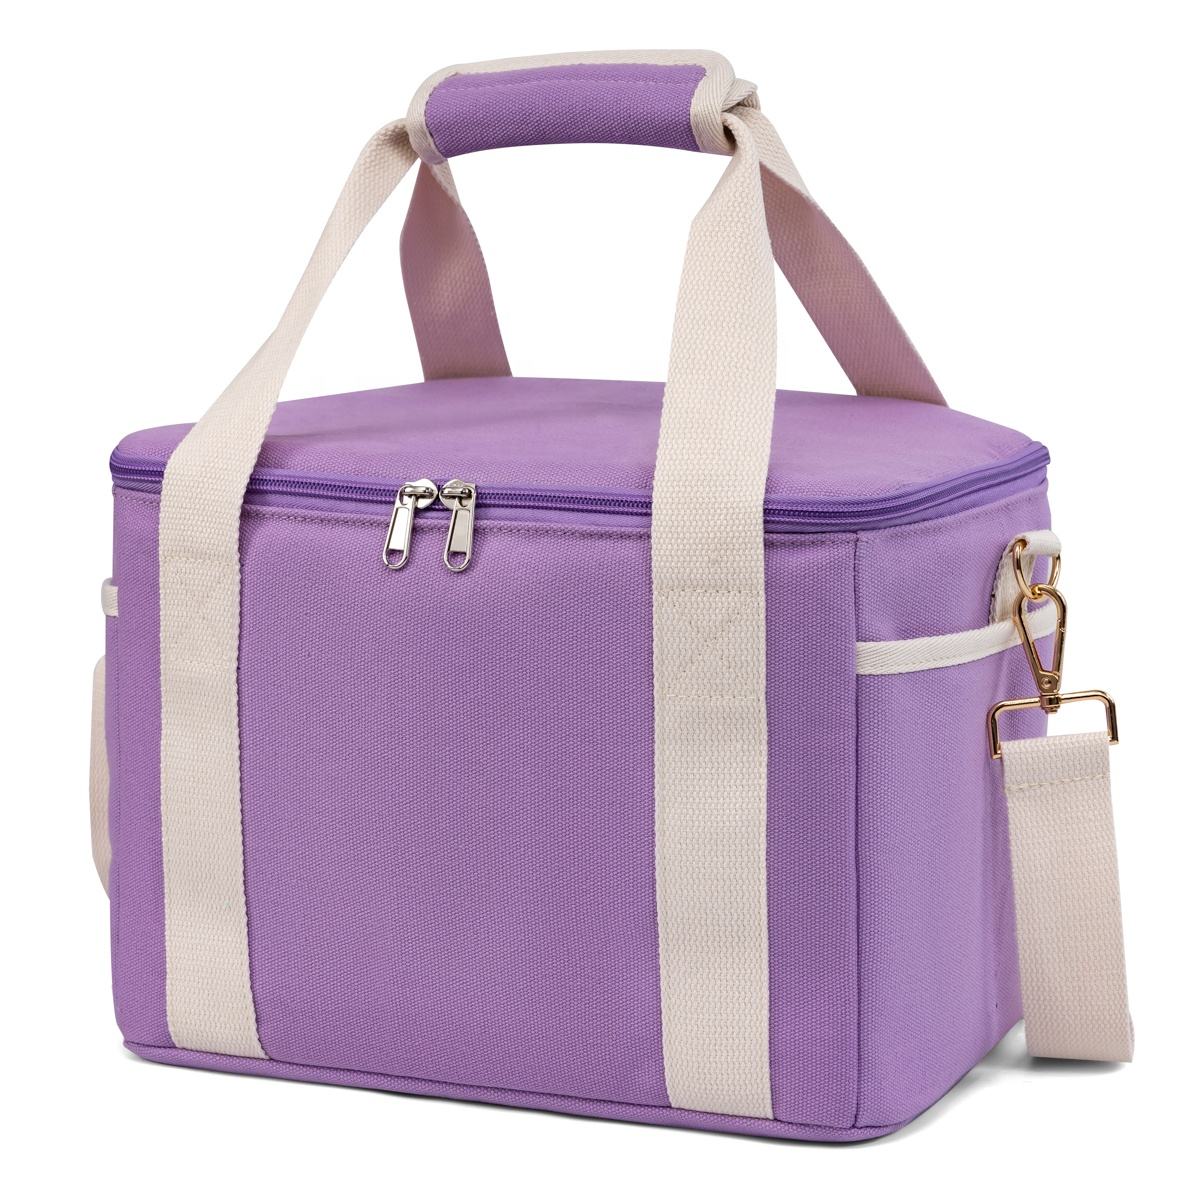 Outdoor Canvas Insulated Cooler Bag Product Details